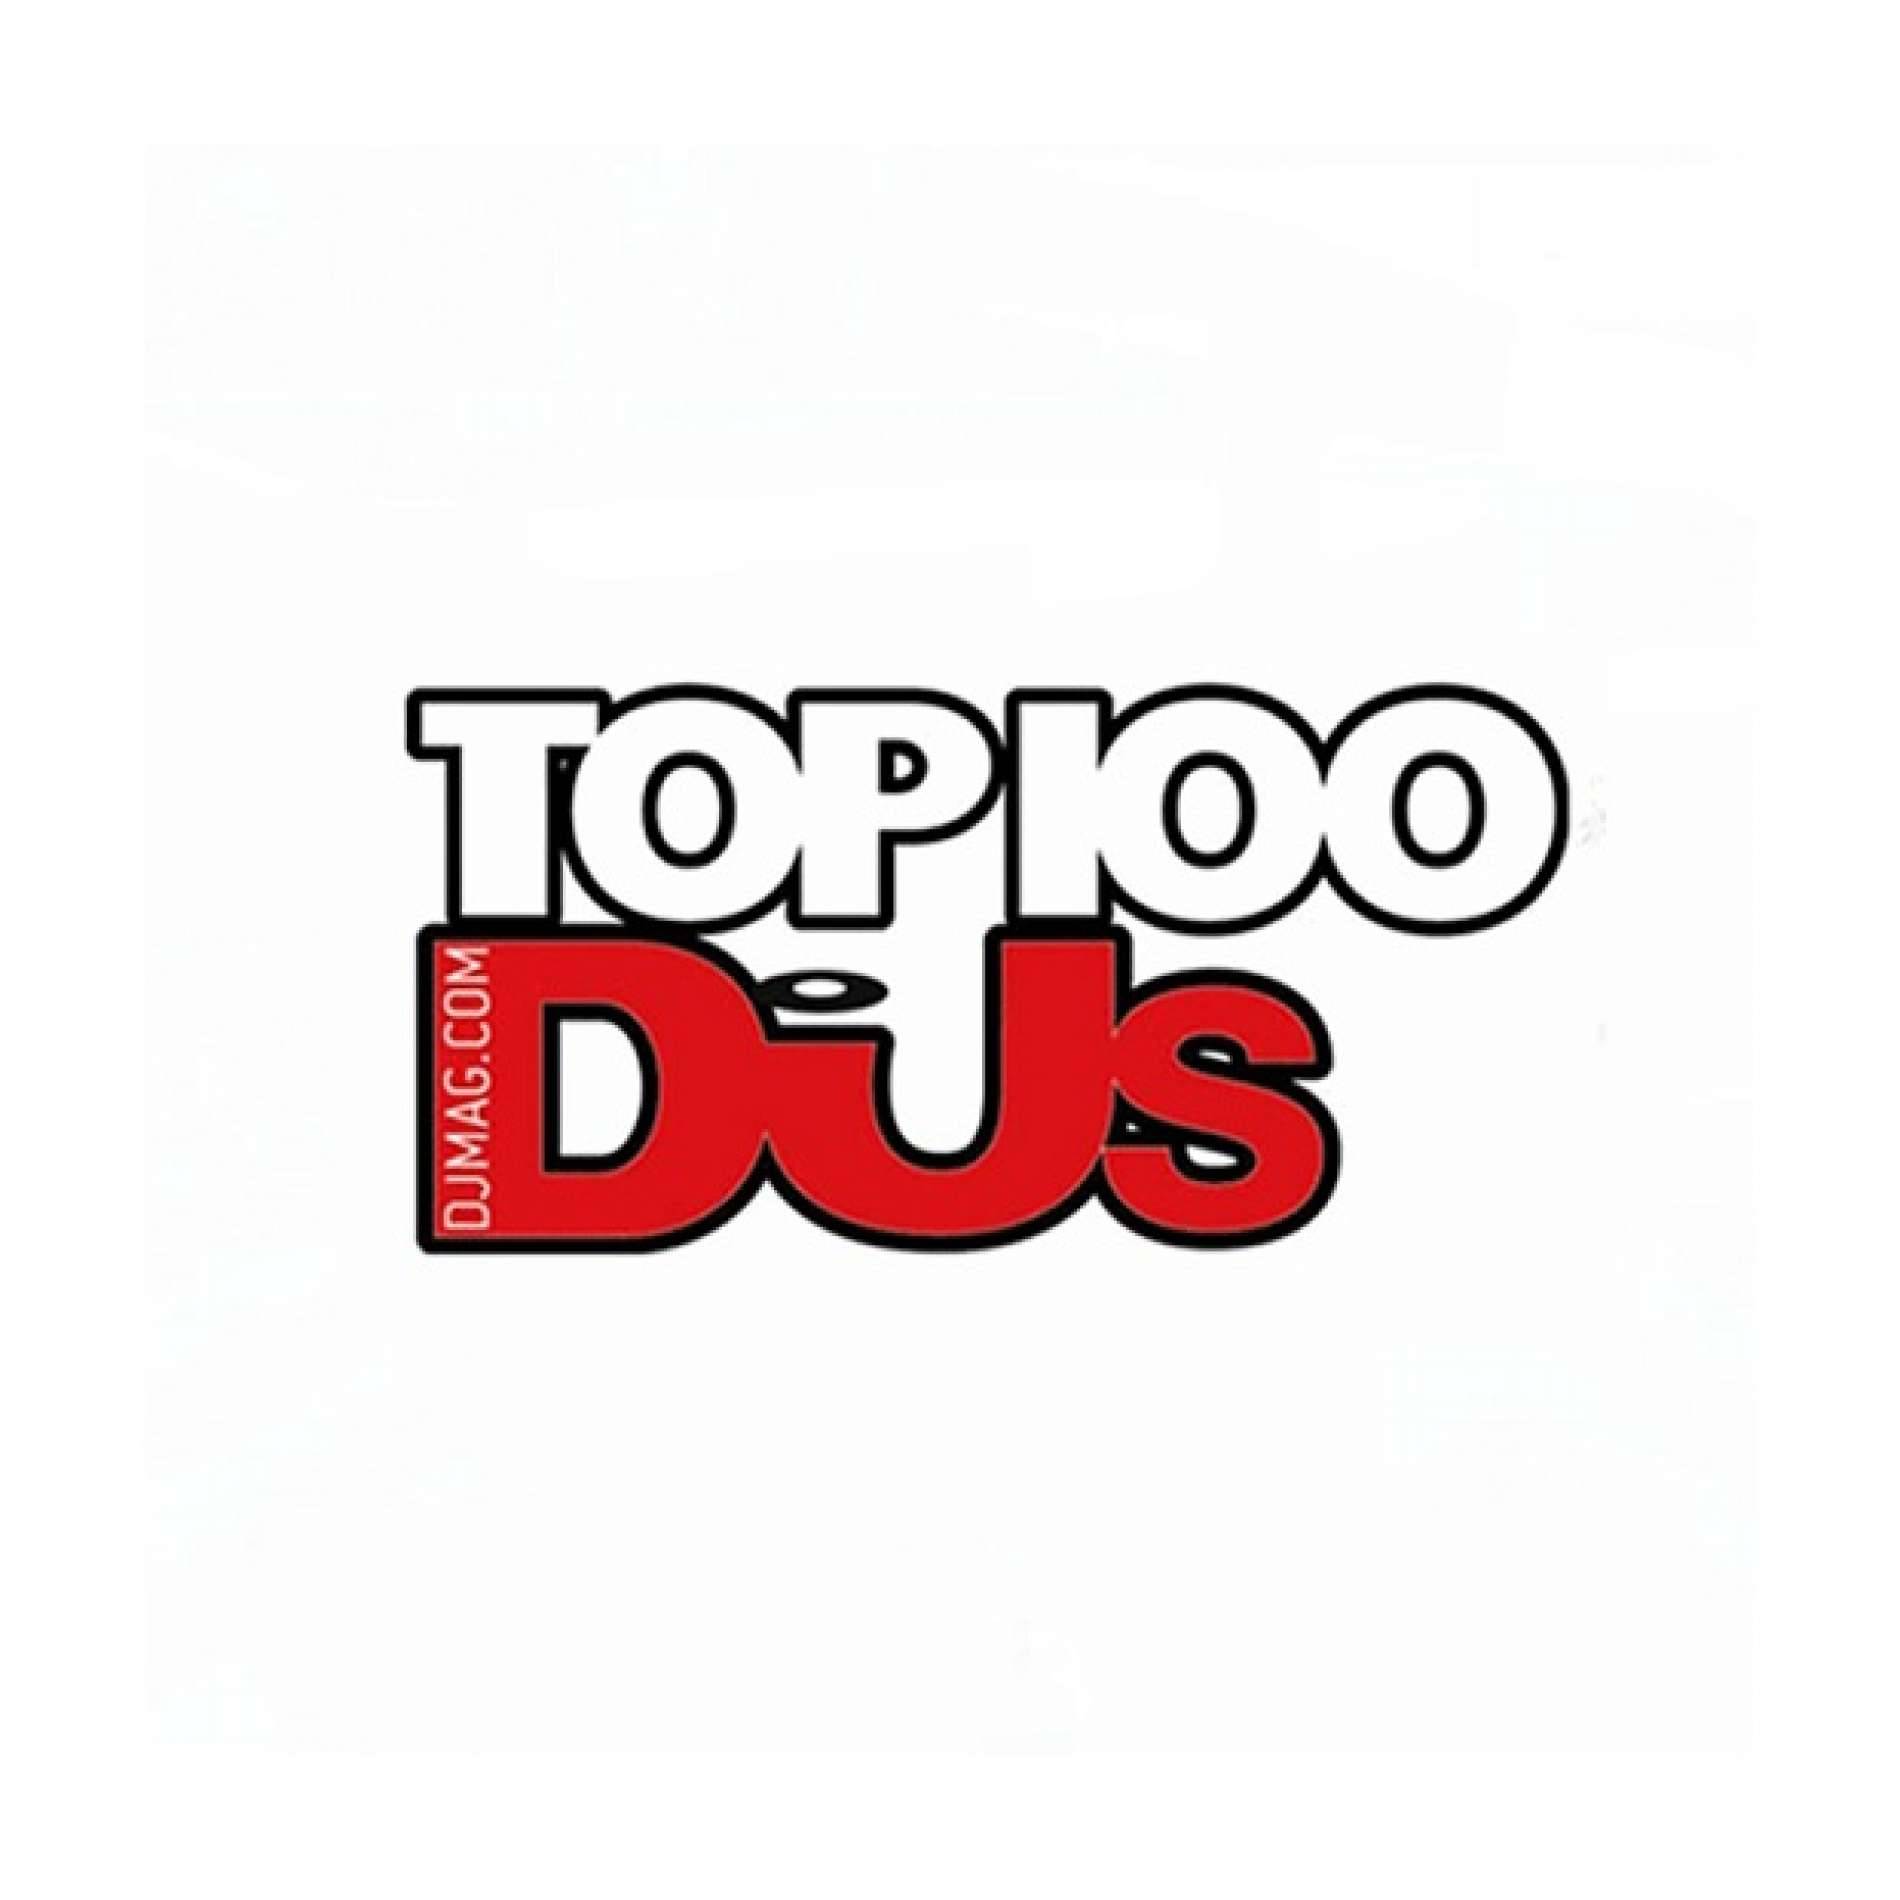 Spinnin Records Congratulates Its Artists In The Dj Top 100 News Spinnin Records Dutch record label founded in 1999 by eelko van kooten and roger de graaf. spinnin records congratulates its